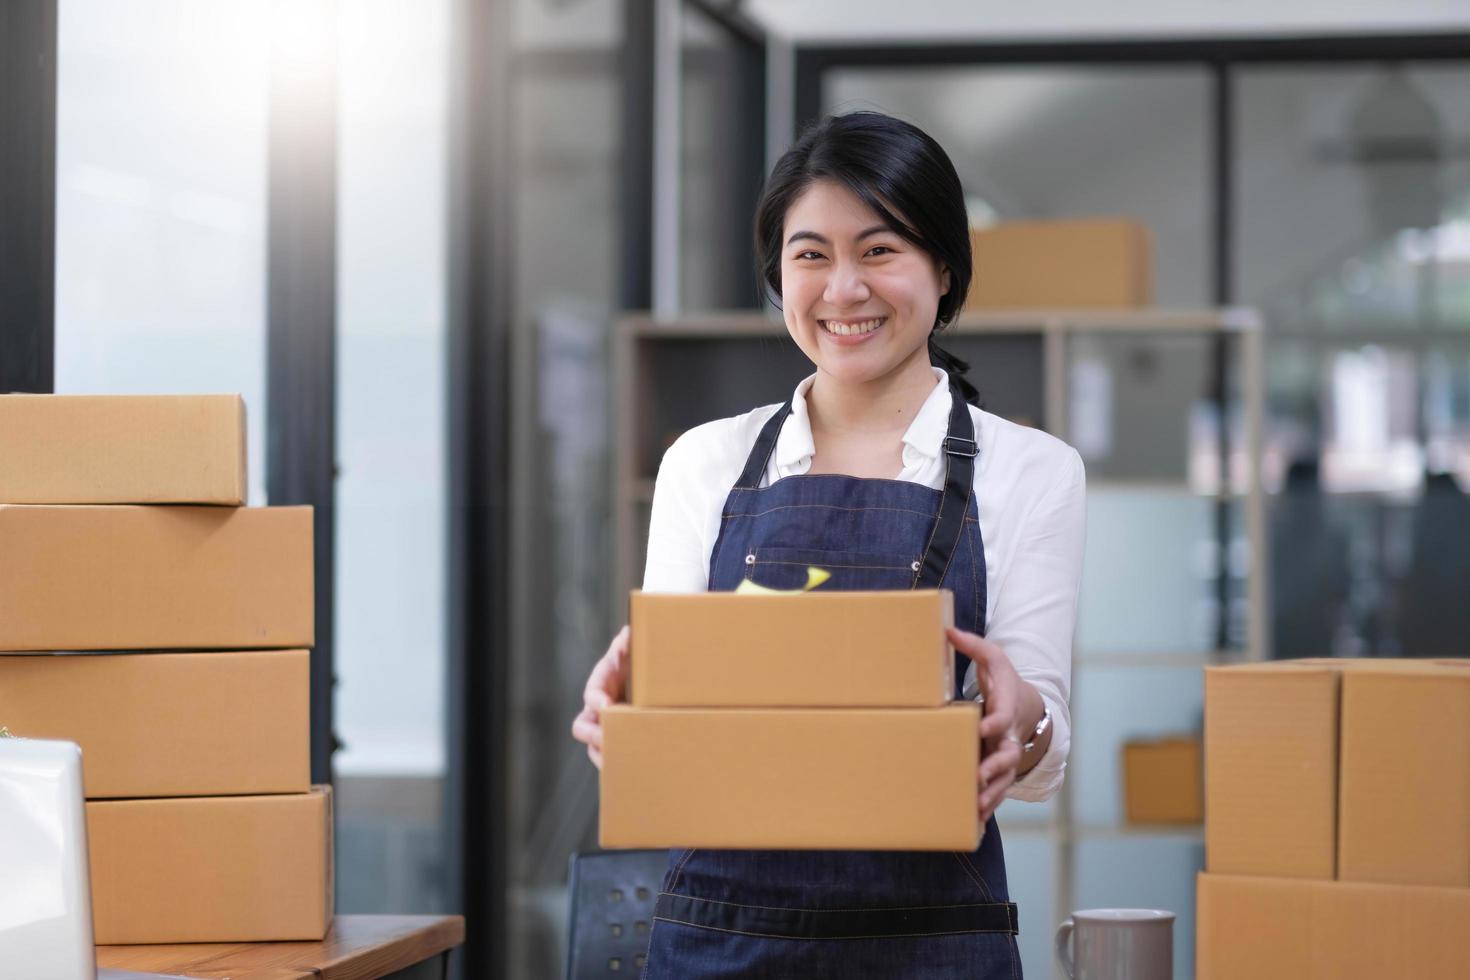 Startup small business entrepreneur of freelance Asian woman using a laptop with box Cheerful success Asian woman her hand lifts up online marketing packaging box and delivery SME idea concept photo